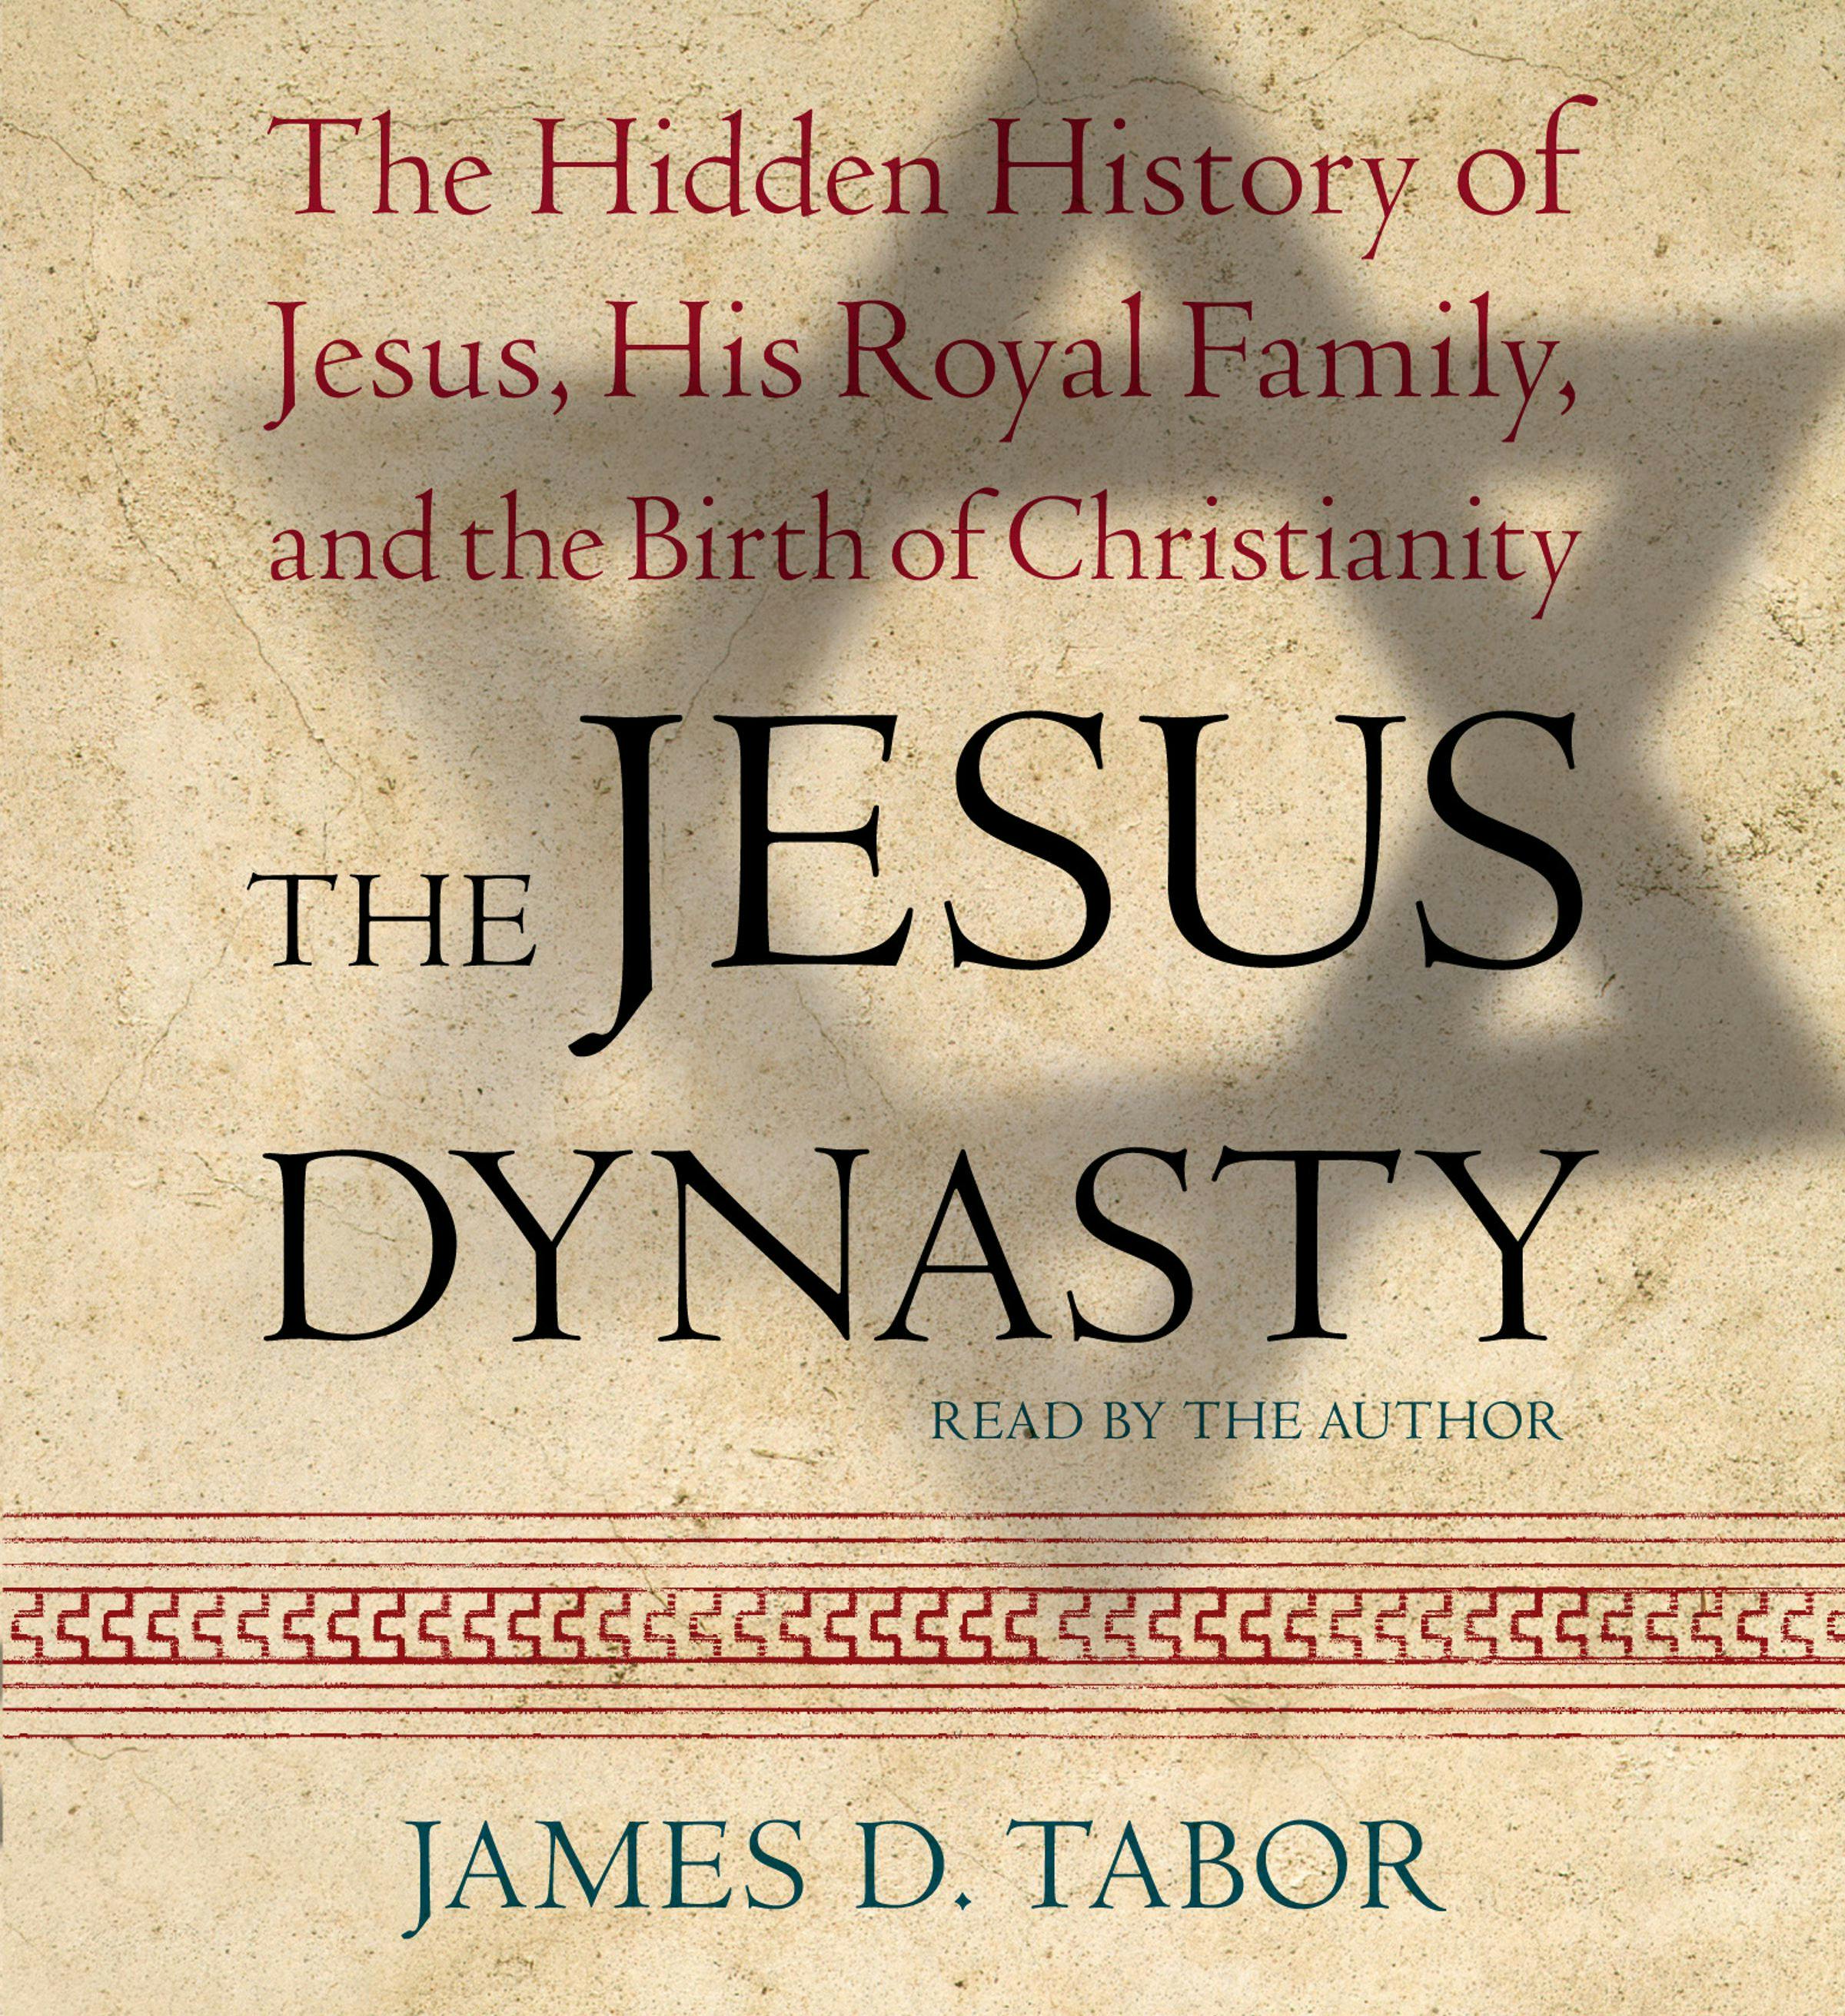 The Jesus Dynasty: The Hidden History of Jesus, His Royal Family, and the Birth of Christianity - undefined